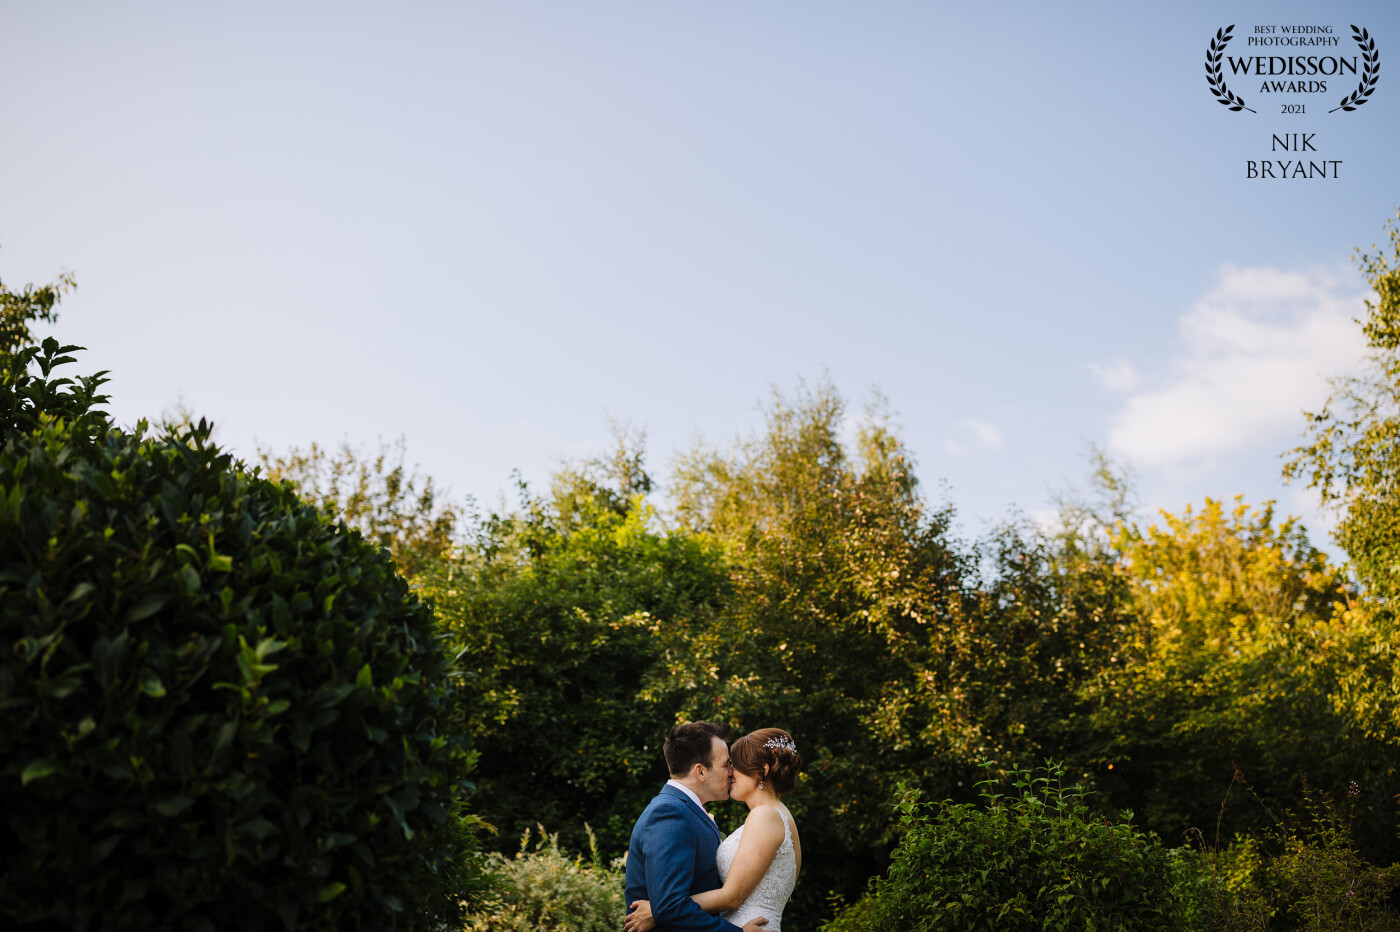 Laura and Stu in the gardens at Styal Lodge during their wedding day. I loved the contrast of the clean sky and the greenery which helped with the composition